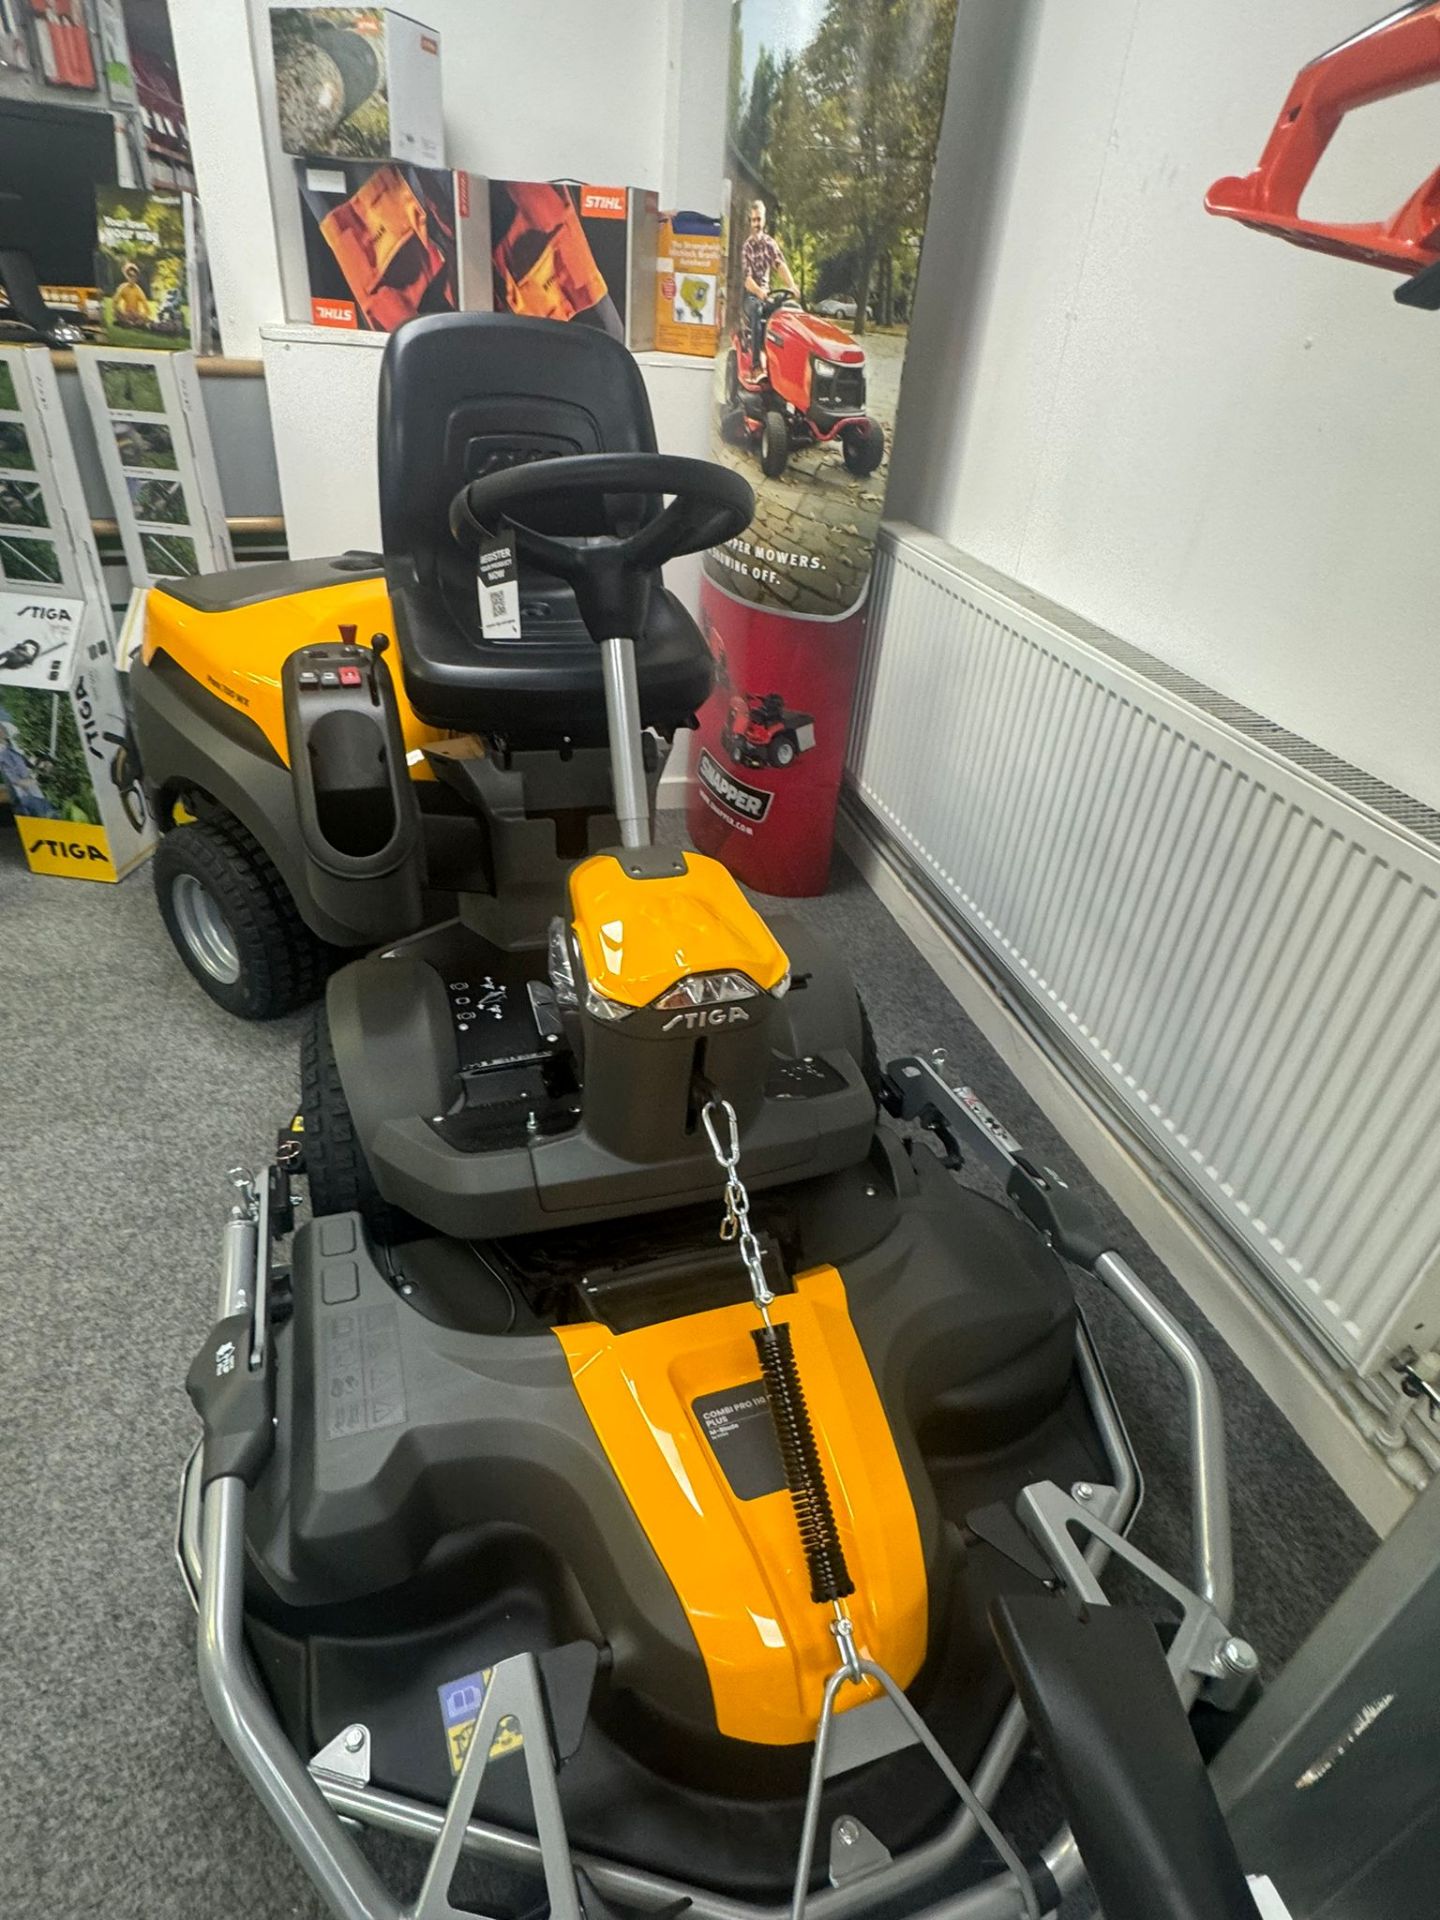 NEW/UNUSED STIGA PARK 700 WX RIDE ON LAWN MOWER 4X4 OUT FRONT *PLUS VAT* - Image 4 of 16